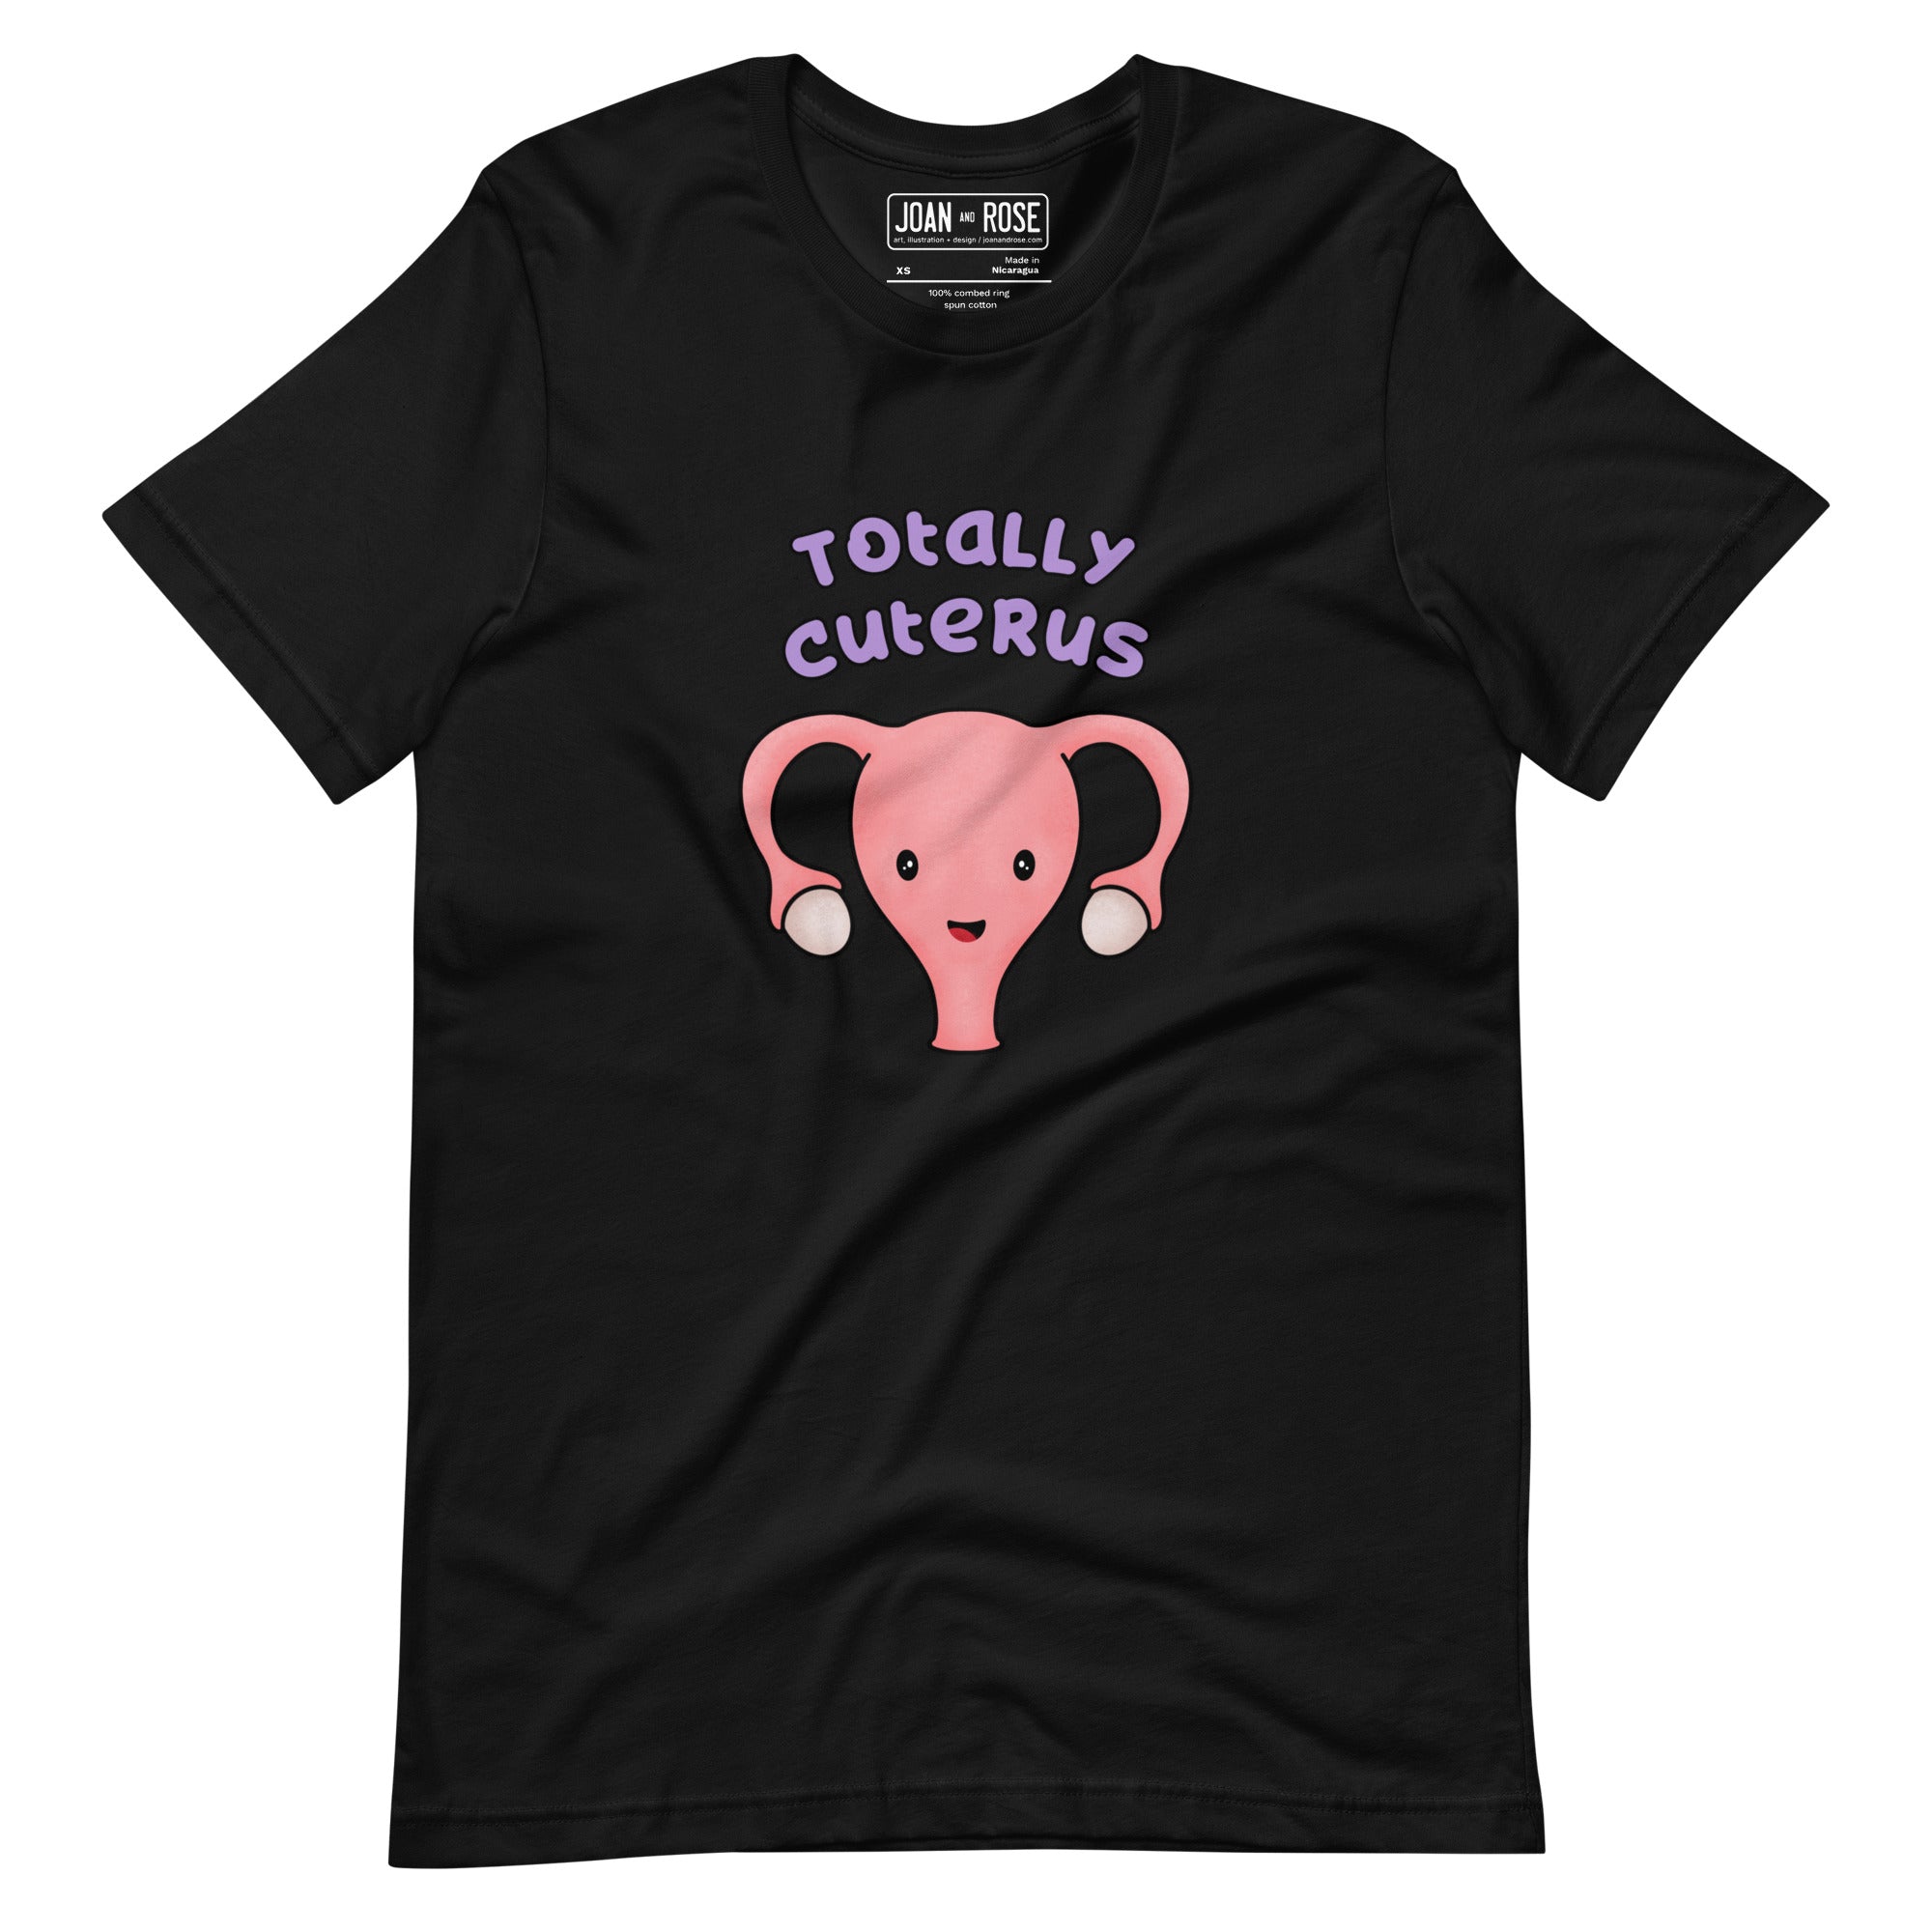 Black coloured  t-shirt with an illustration of a cute uterus character smiling with the text in purple 'Totally Cuterus'